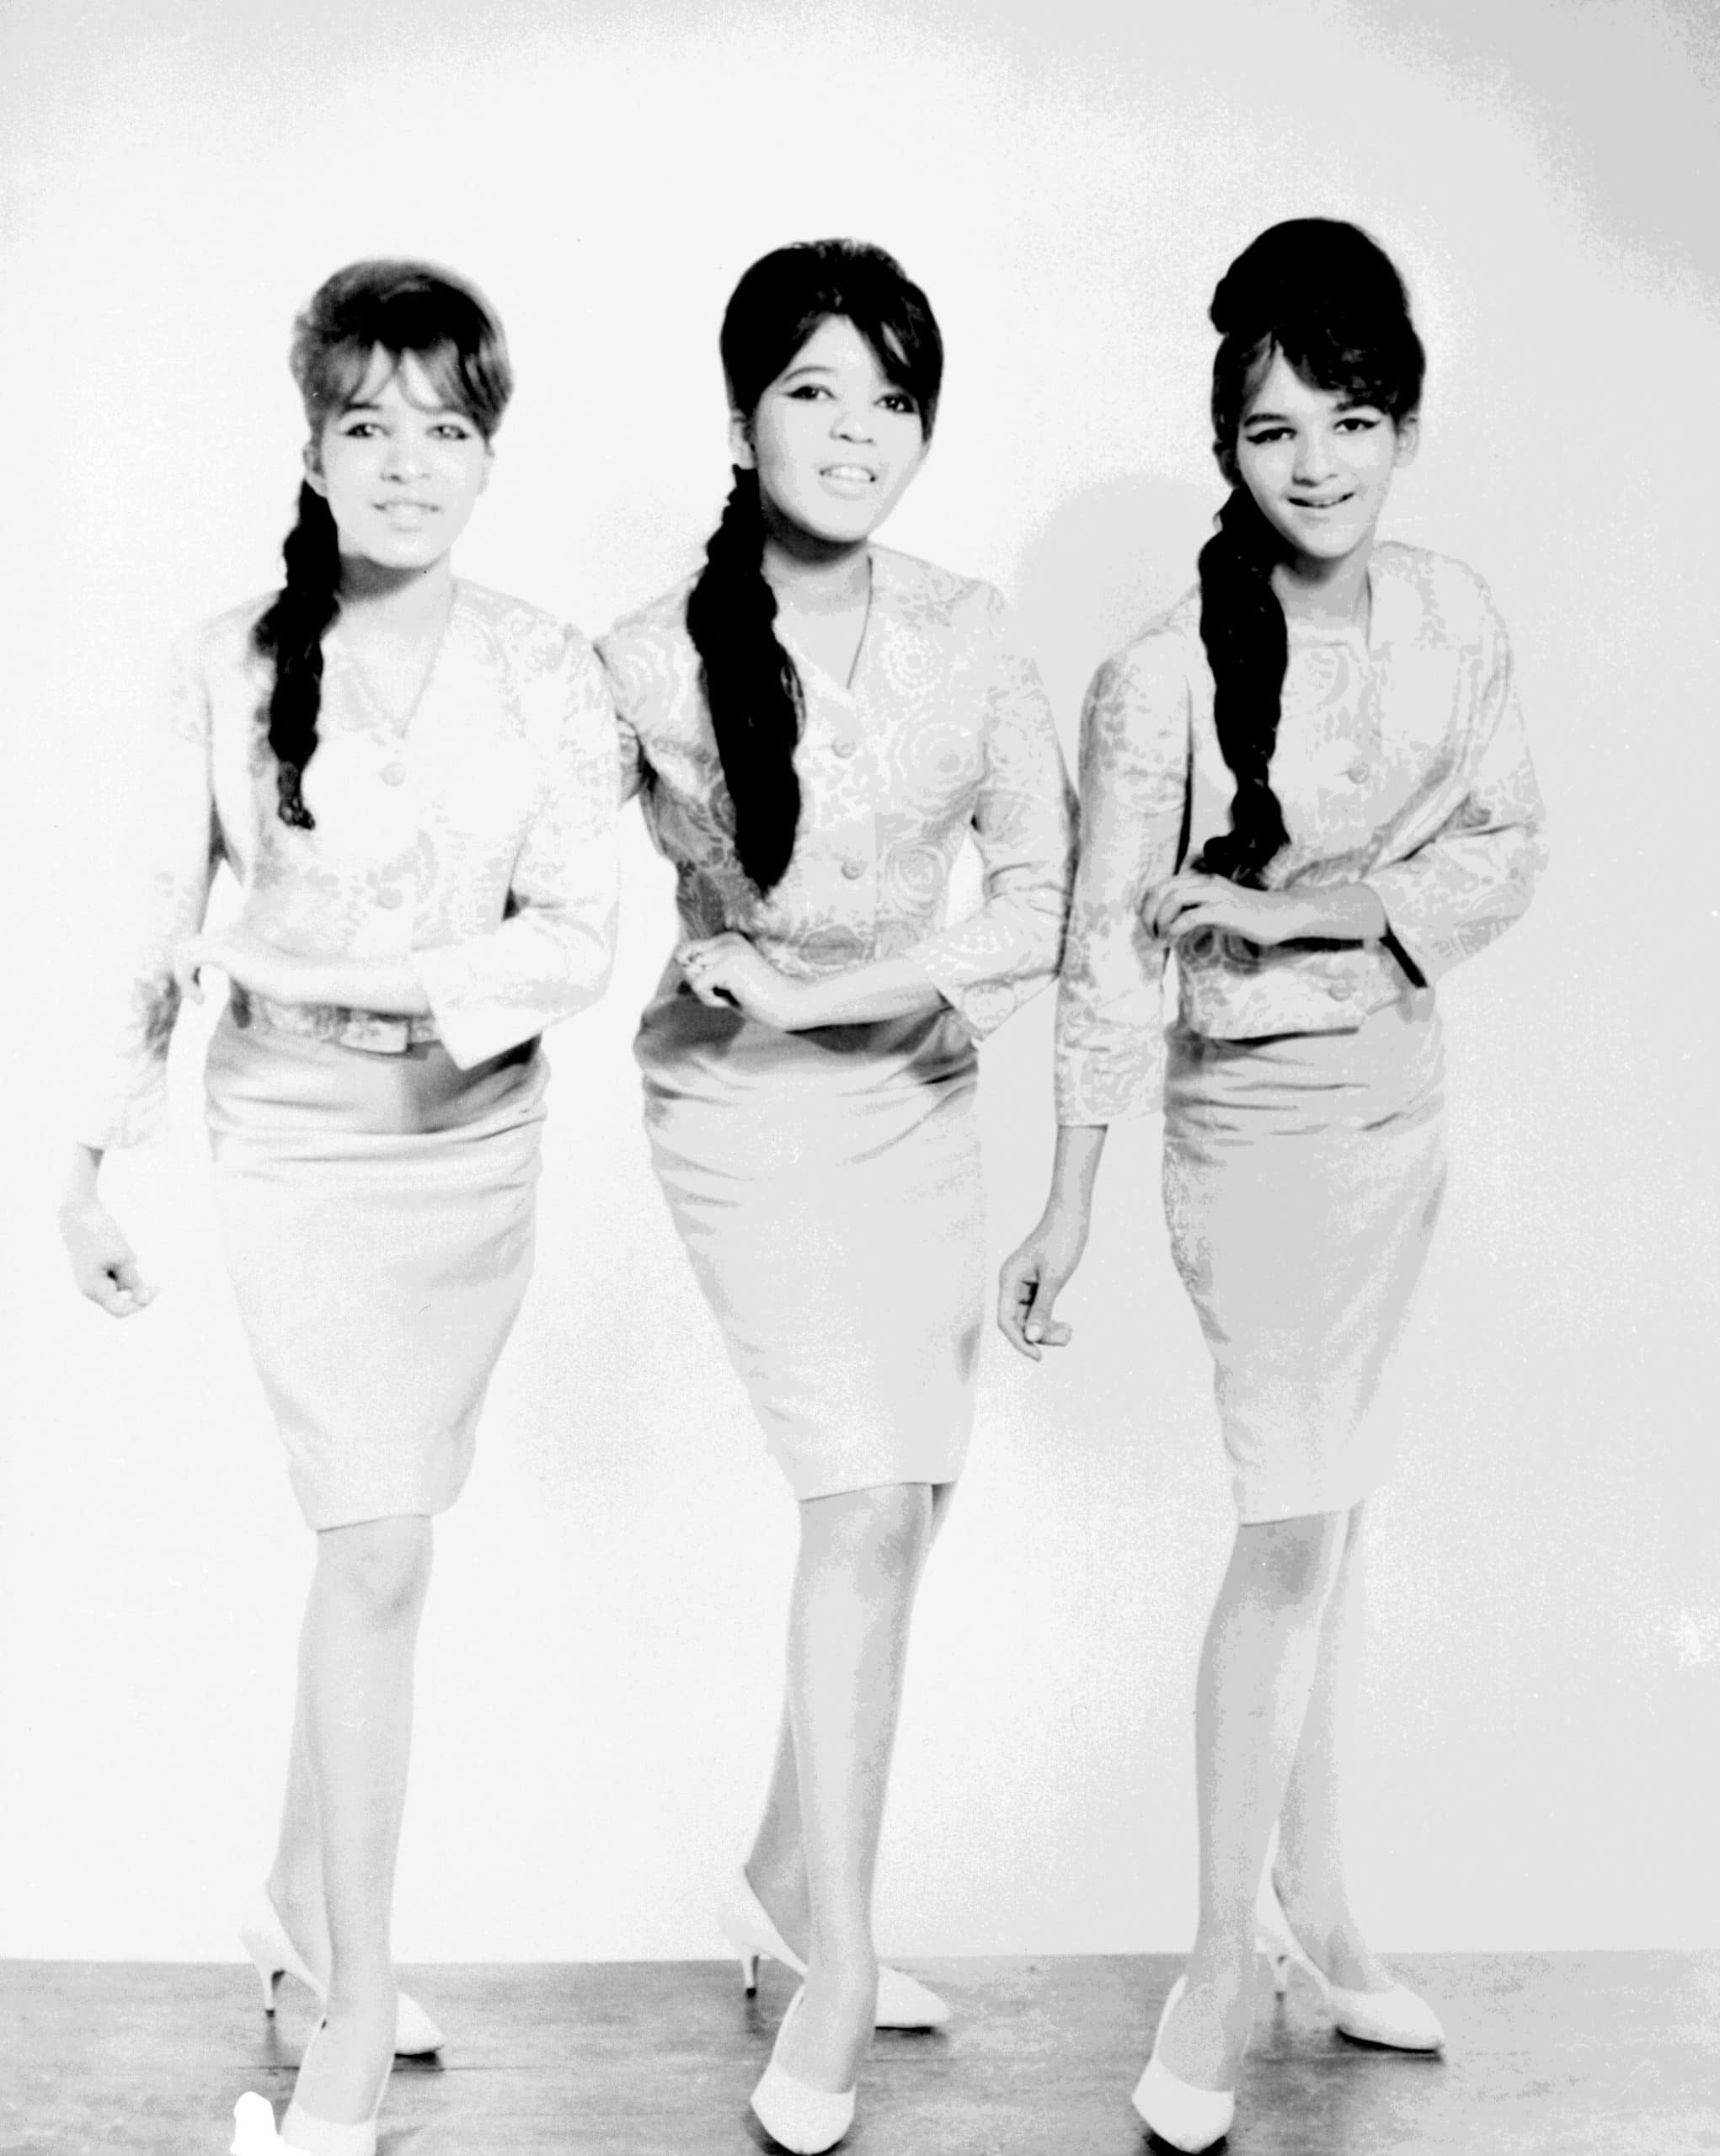 The Ronettes, from left: Estelle Bennett, Ronnie Spector (before marriage to Phil Spector), Nedra Talley, early 1960s